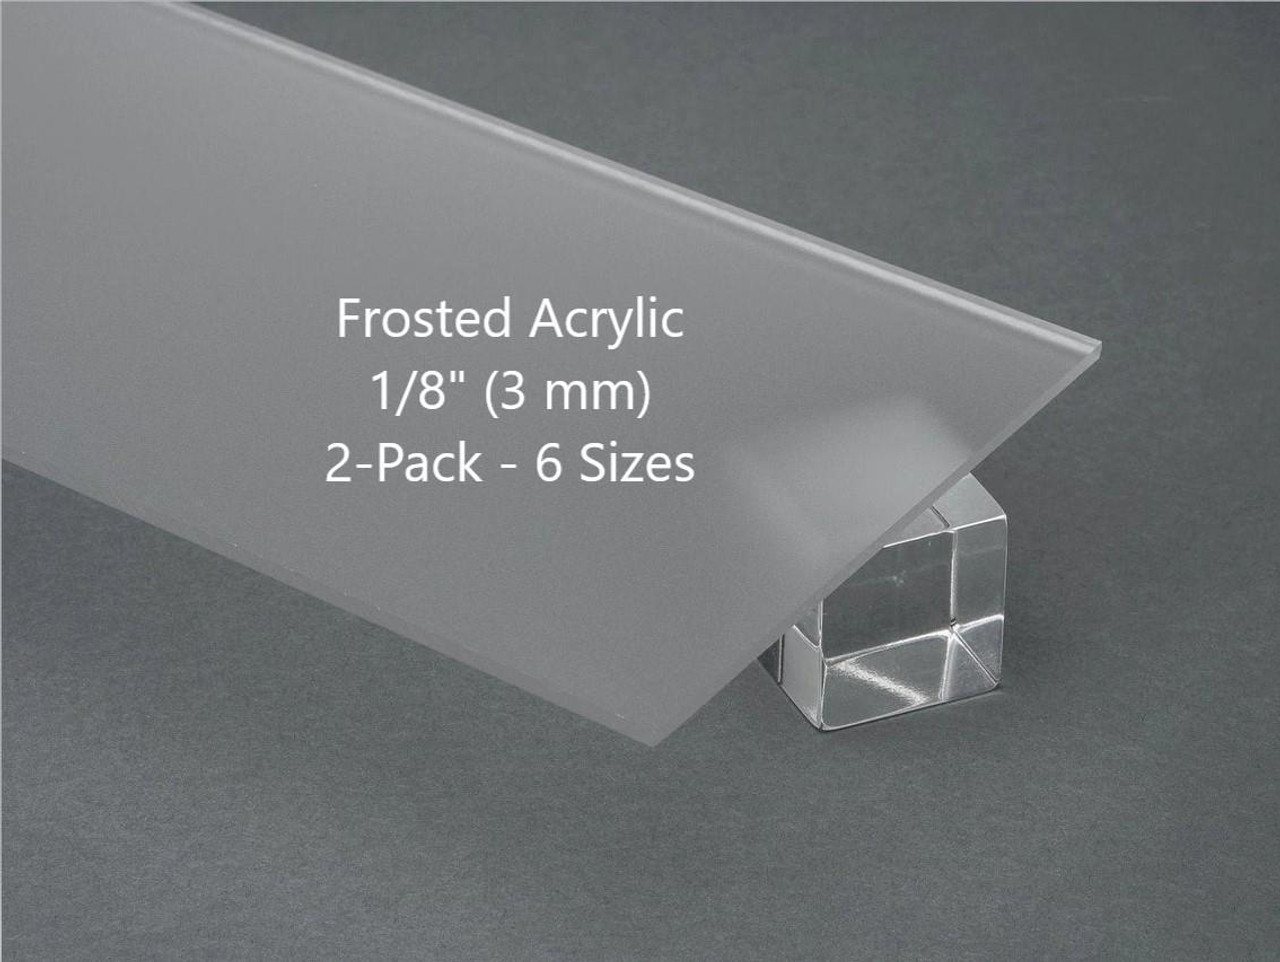 2 Pack Color Cast Acrylic Plexiglass Sheets 1/8” Thick (3mm)